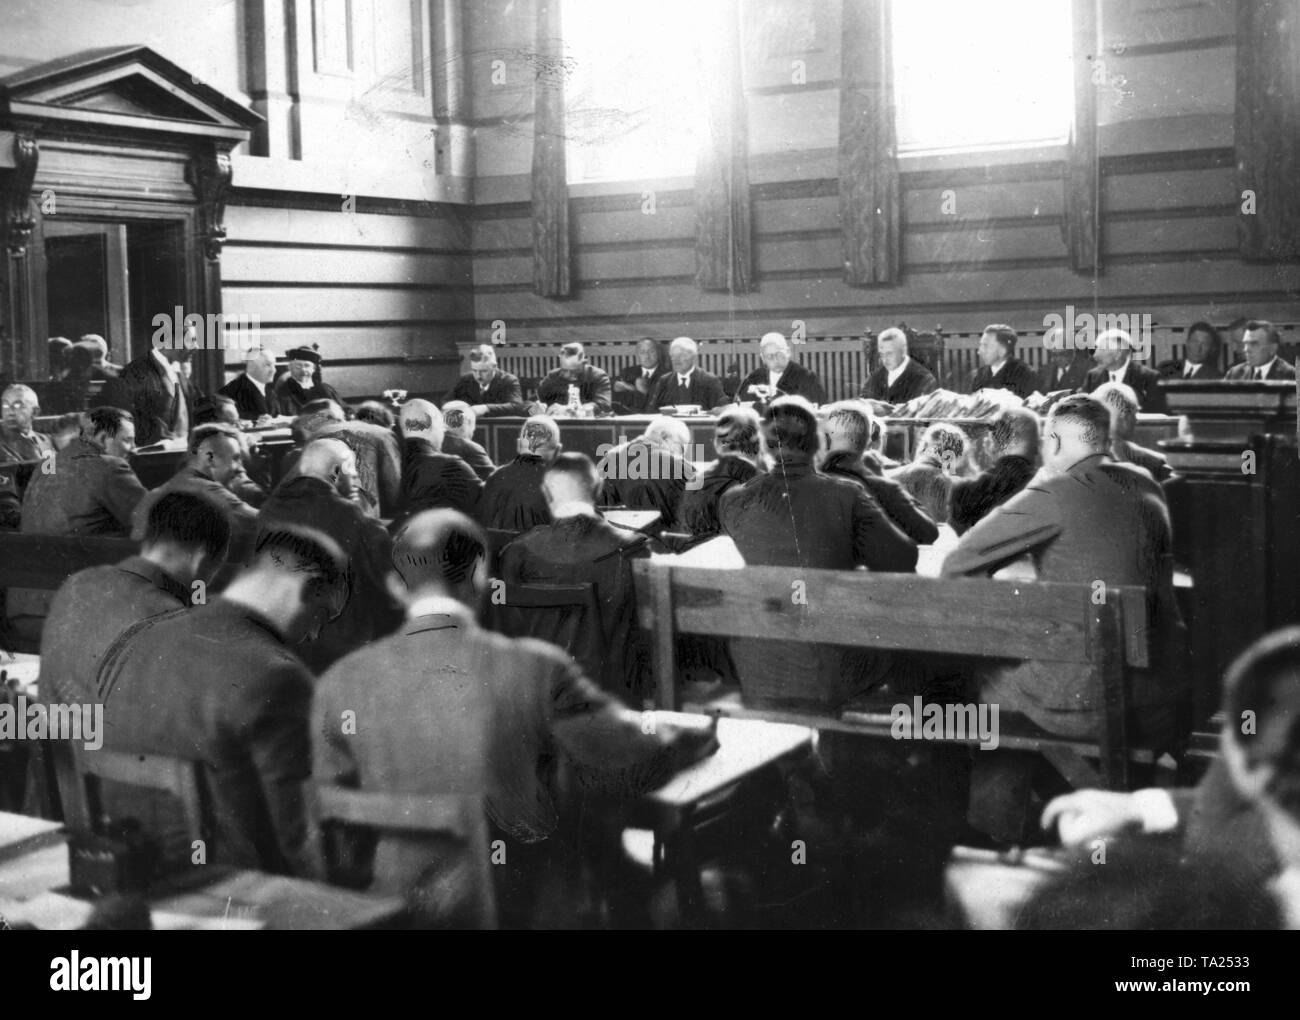 In the courtroom of the district court of Altona, takes place the trial of peasant bombers, who were accused of having prepared and carried out bombings as a protest against offices and authorities in Neumuenster and Oldeslohe. Stock Photo